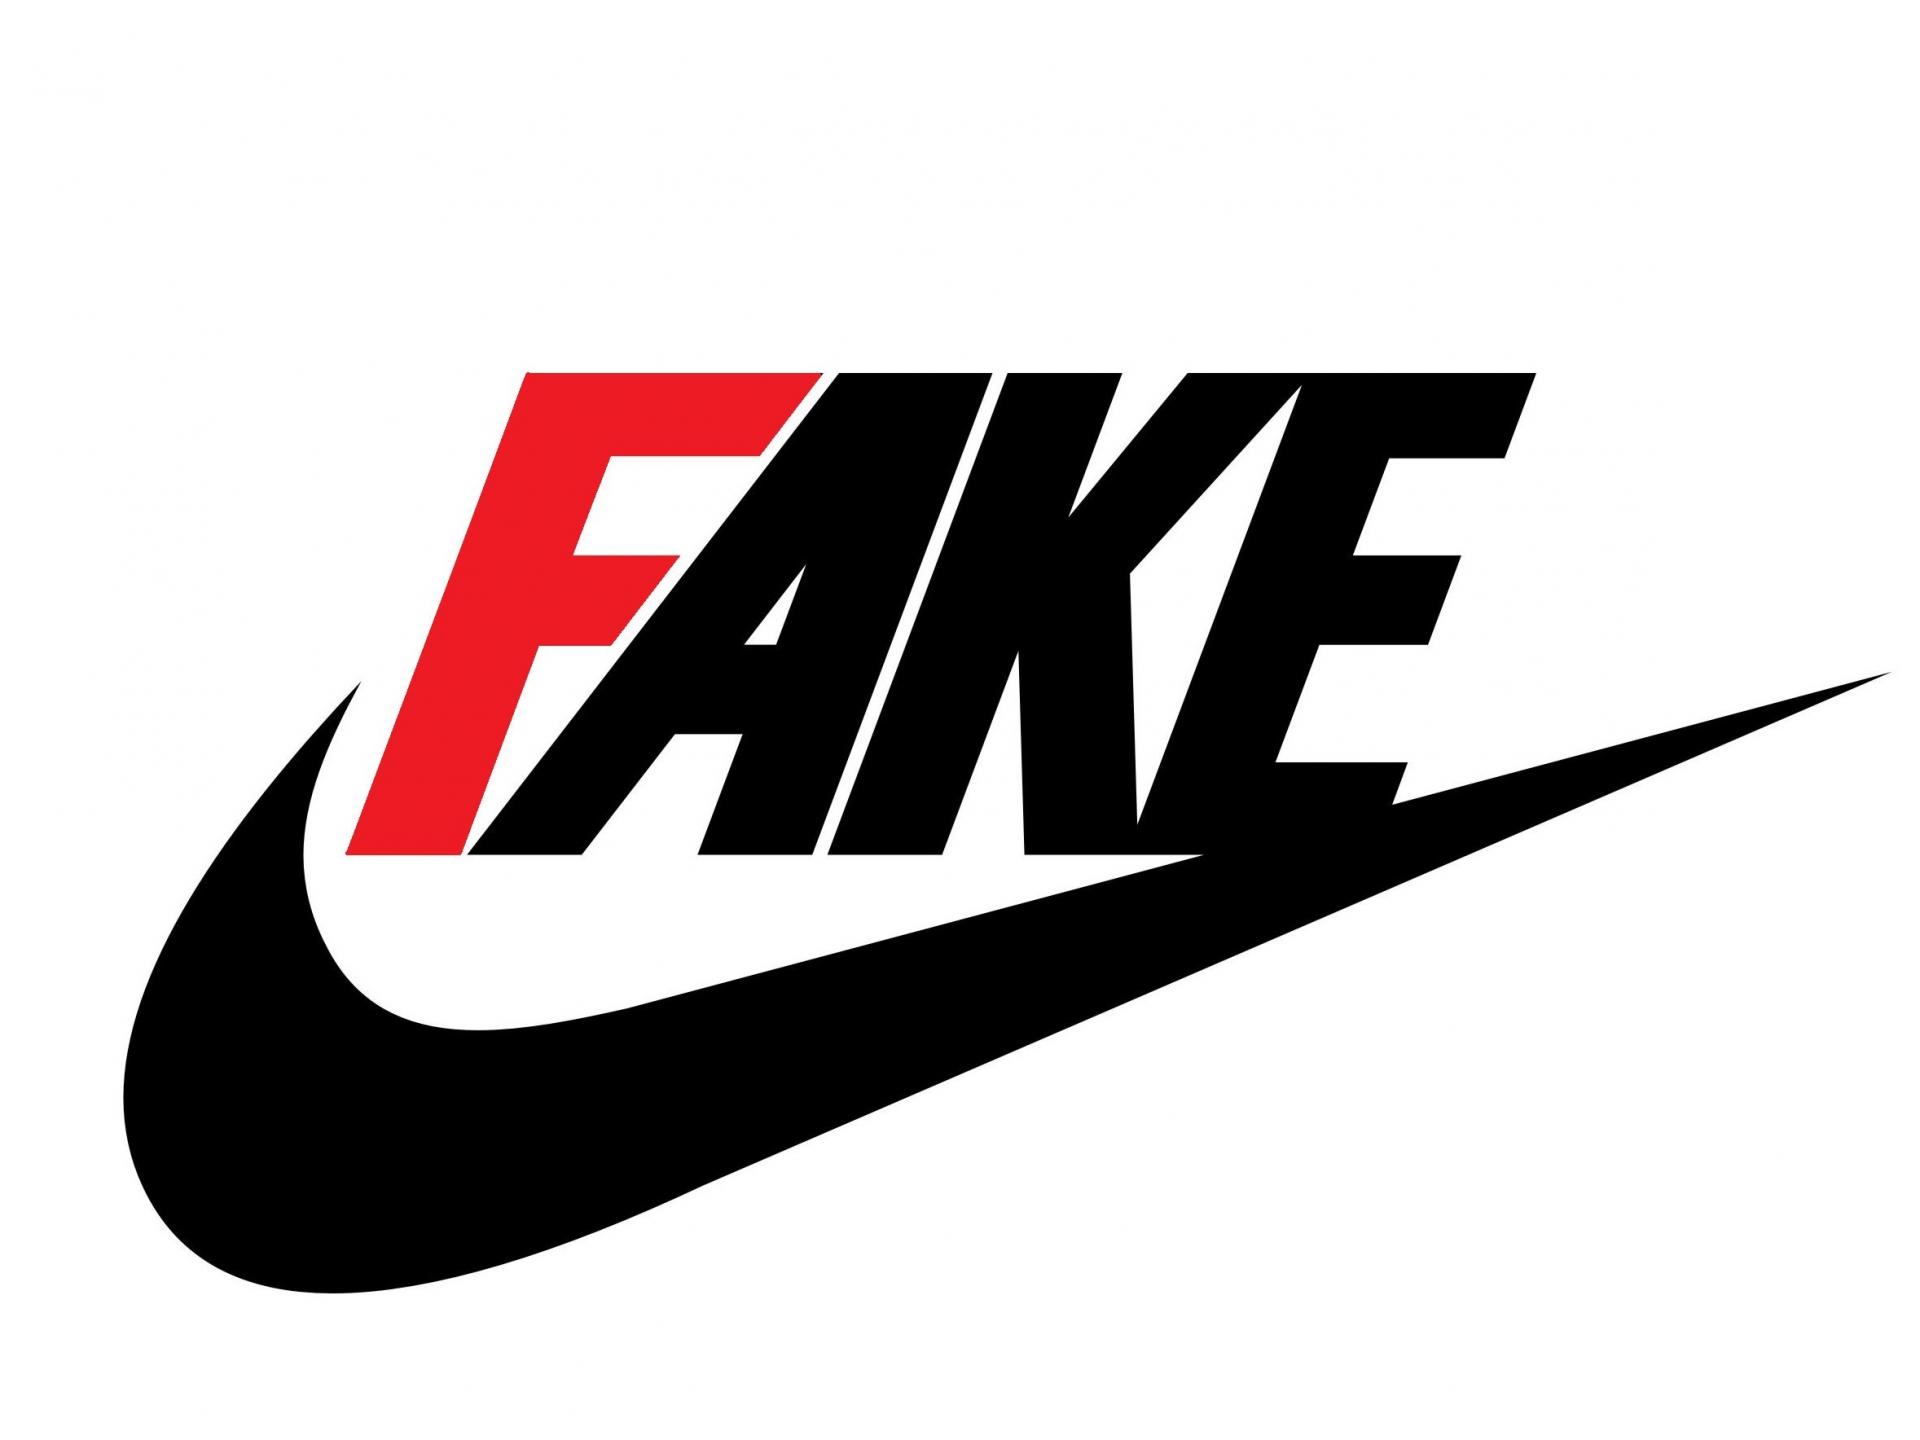 Faking It: Originals, Copies, and Counterfeits